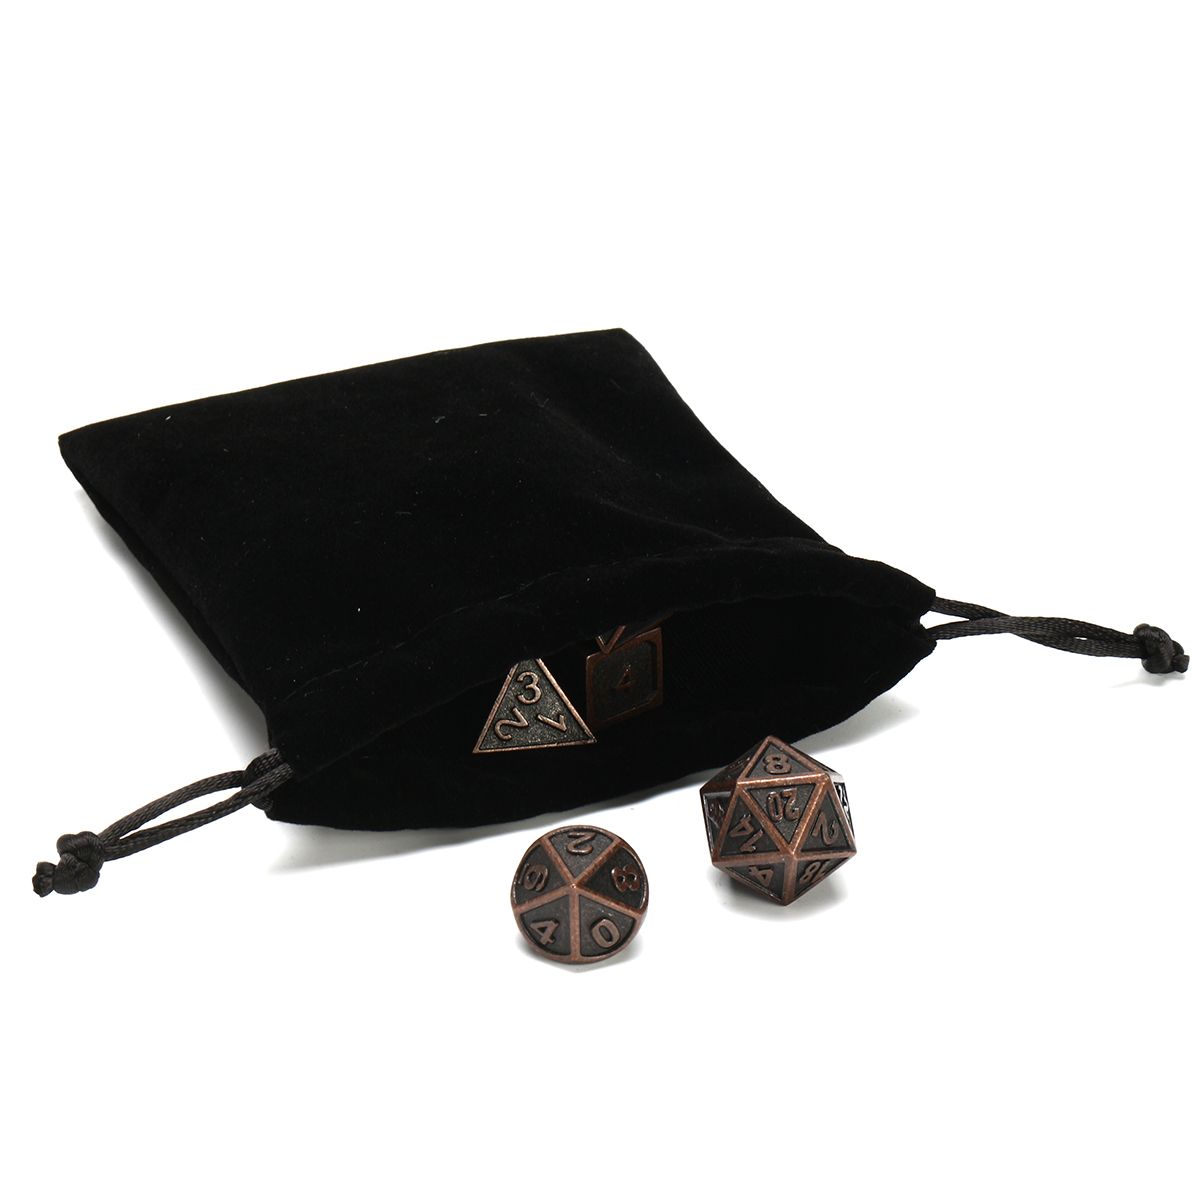 ECUBEE-Solid-Metal-Polyhedral-Dice-Antique-Color-Role-Playing-RPG-Gadget-7-Dice-Set-With-Bag-1261837